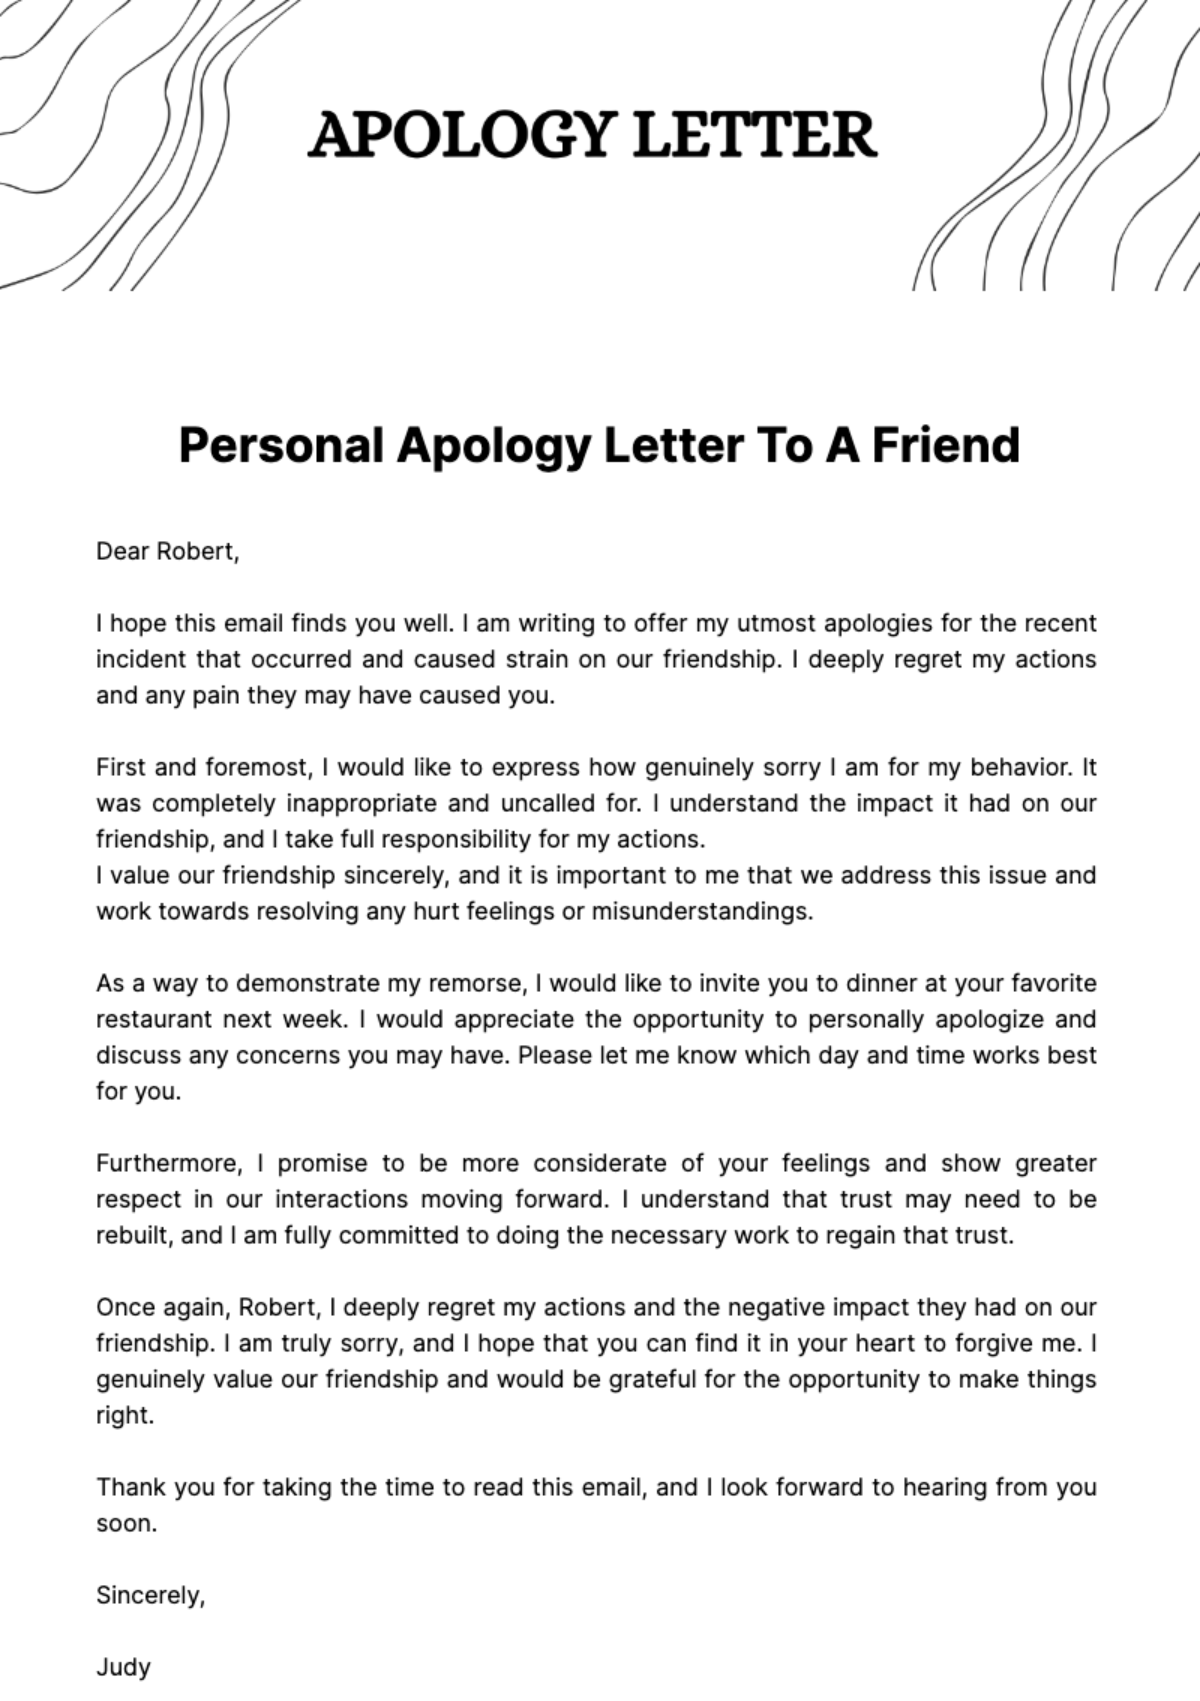 Free Personal Apology Letter to a Friend  Template